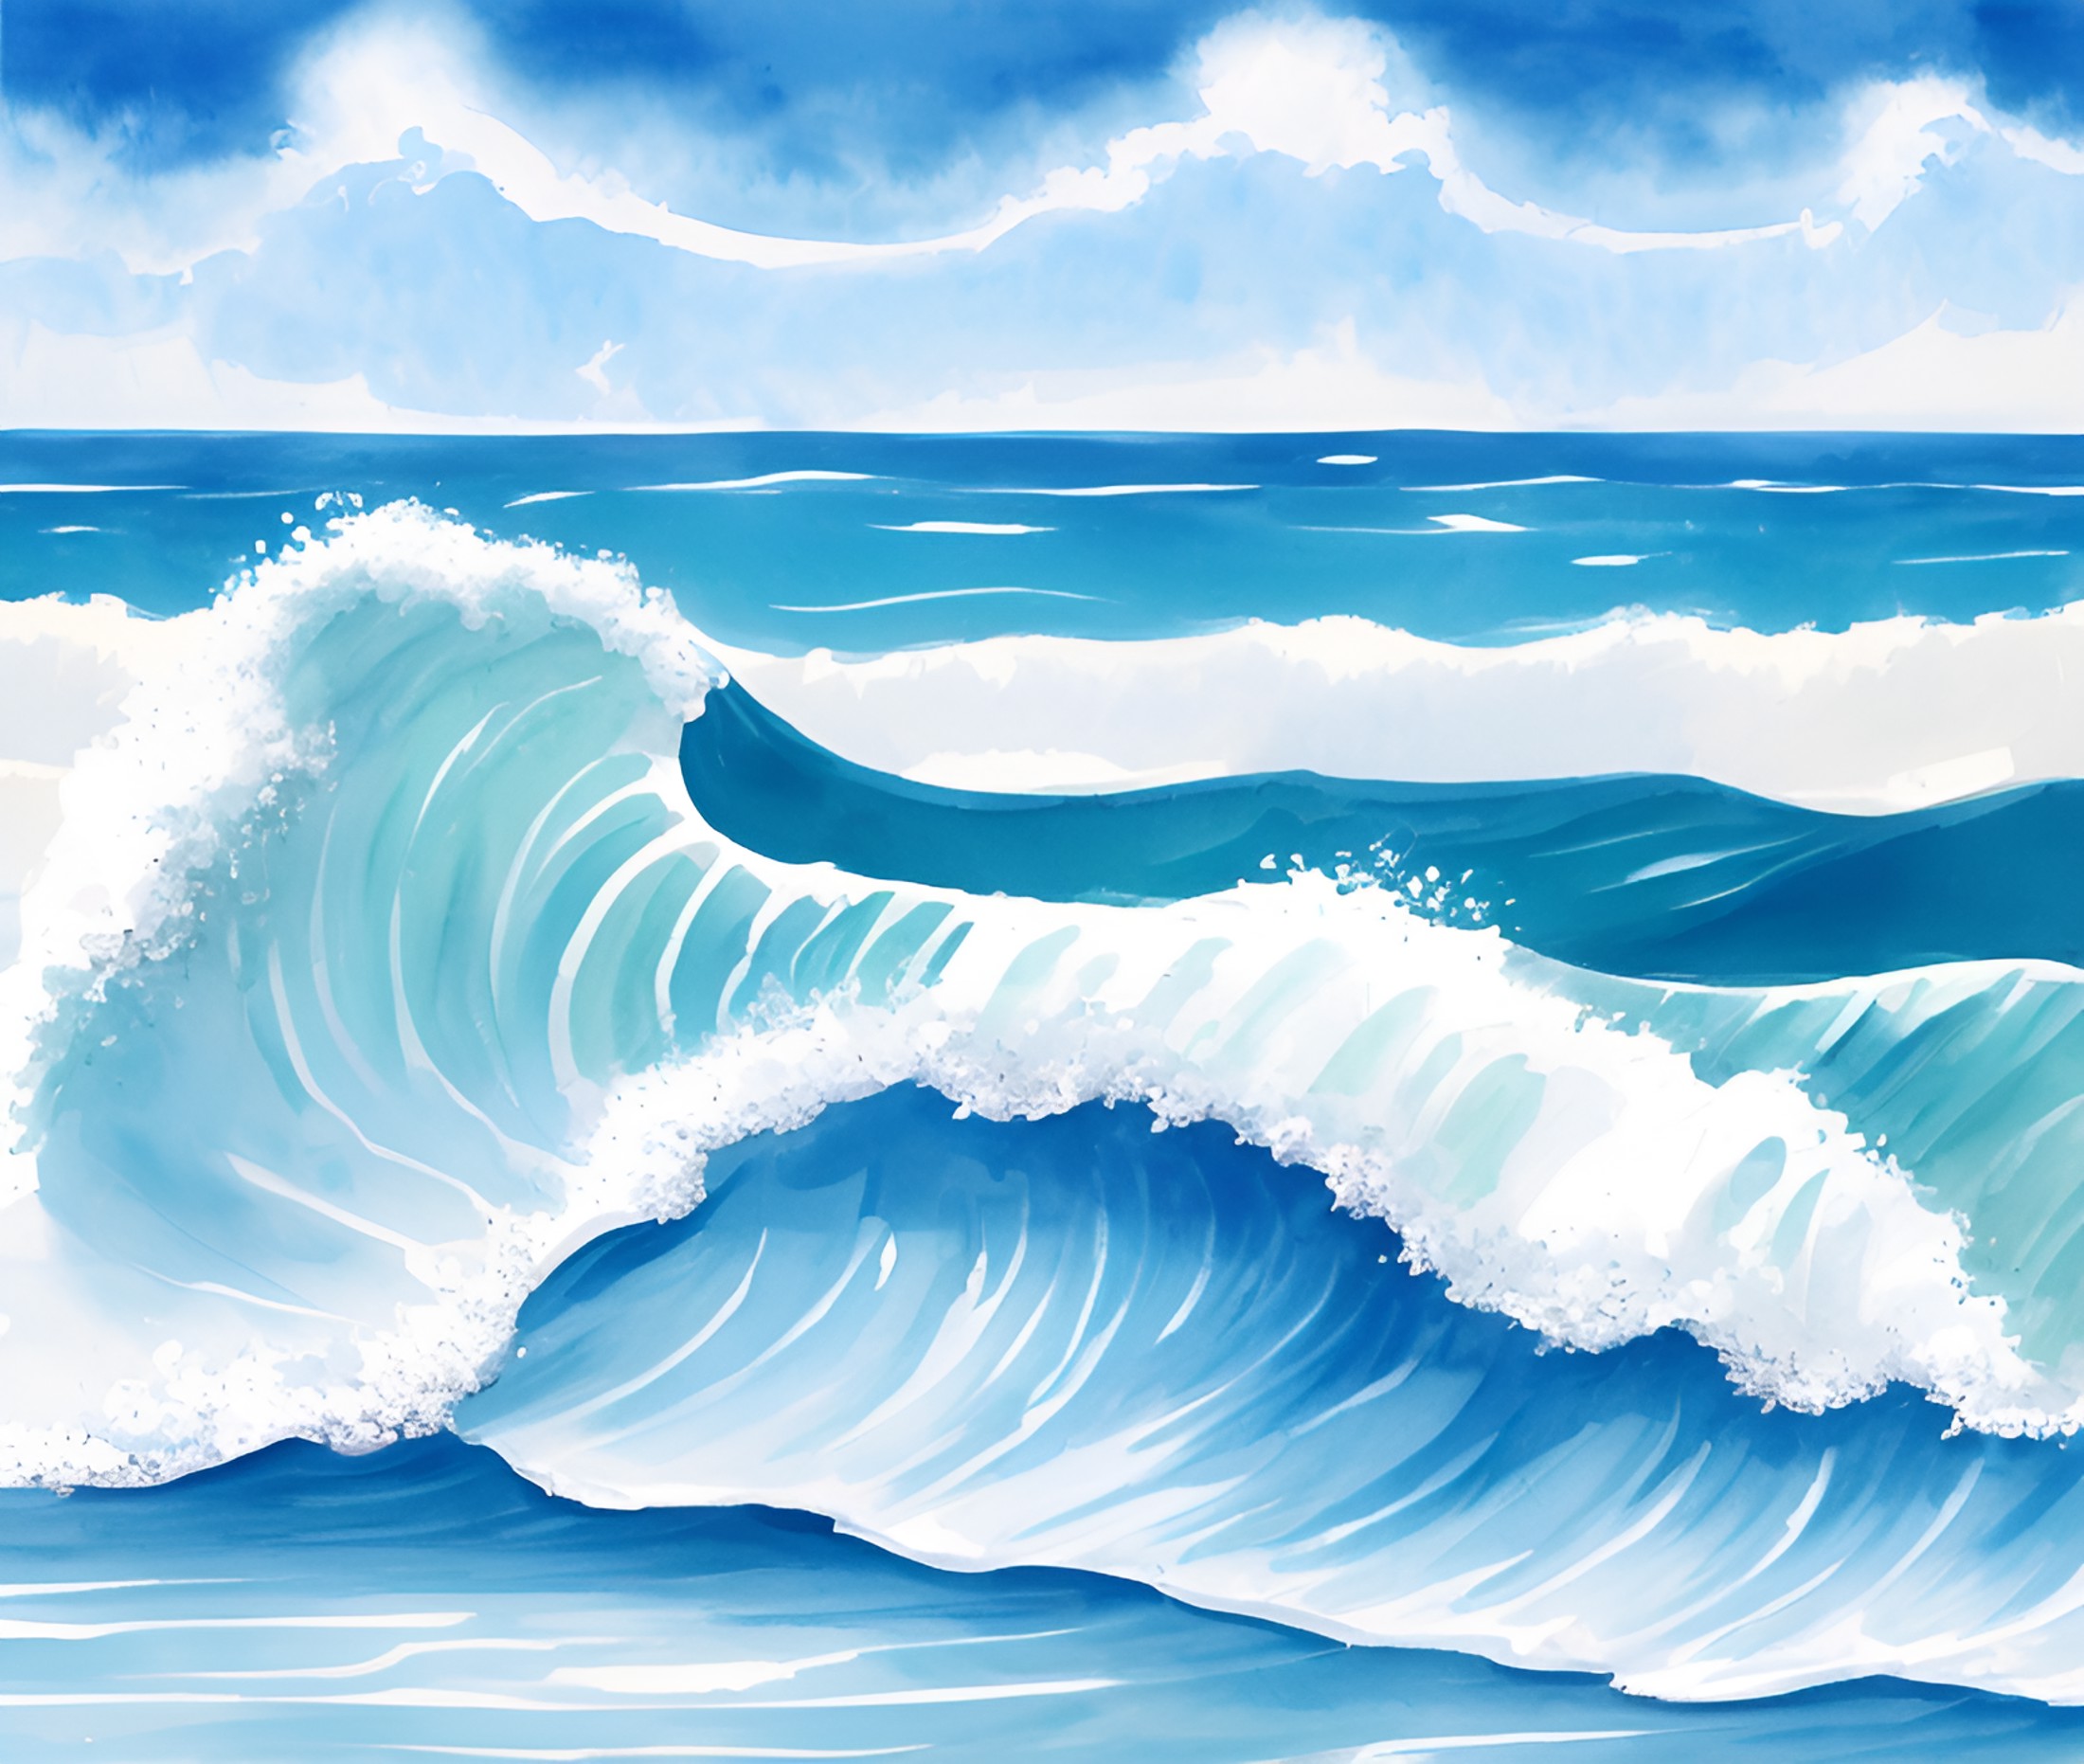 wat3rc0l0r, wc_soft_washes, wc_wet-on-wet, scenery, ocean, blue sky, clouds, foaming waves, beach, background white patter...